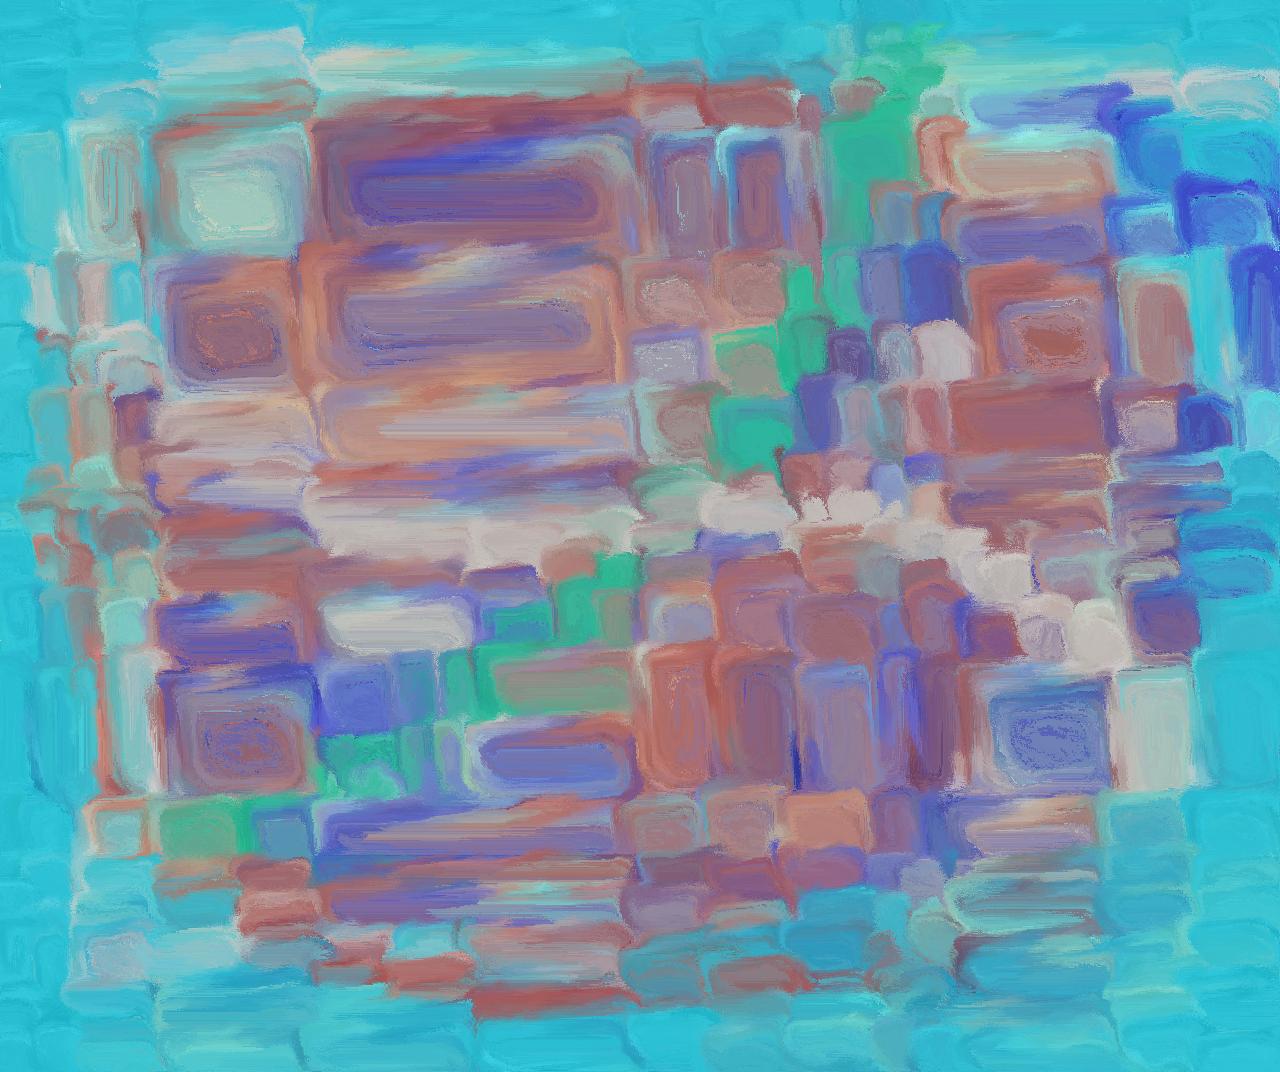 Generative Image: Multiple Shades of Blue, Green, Brown, and White